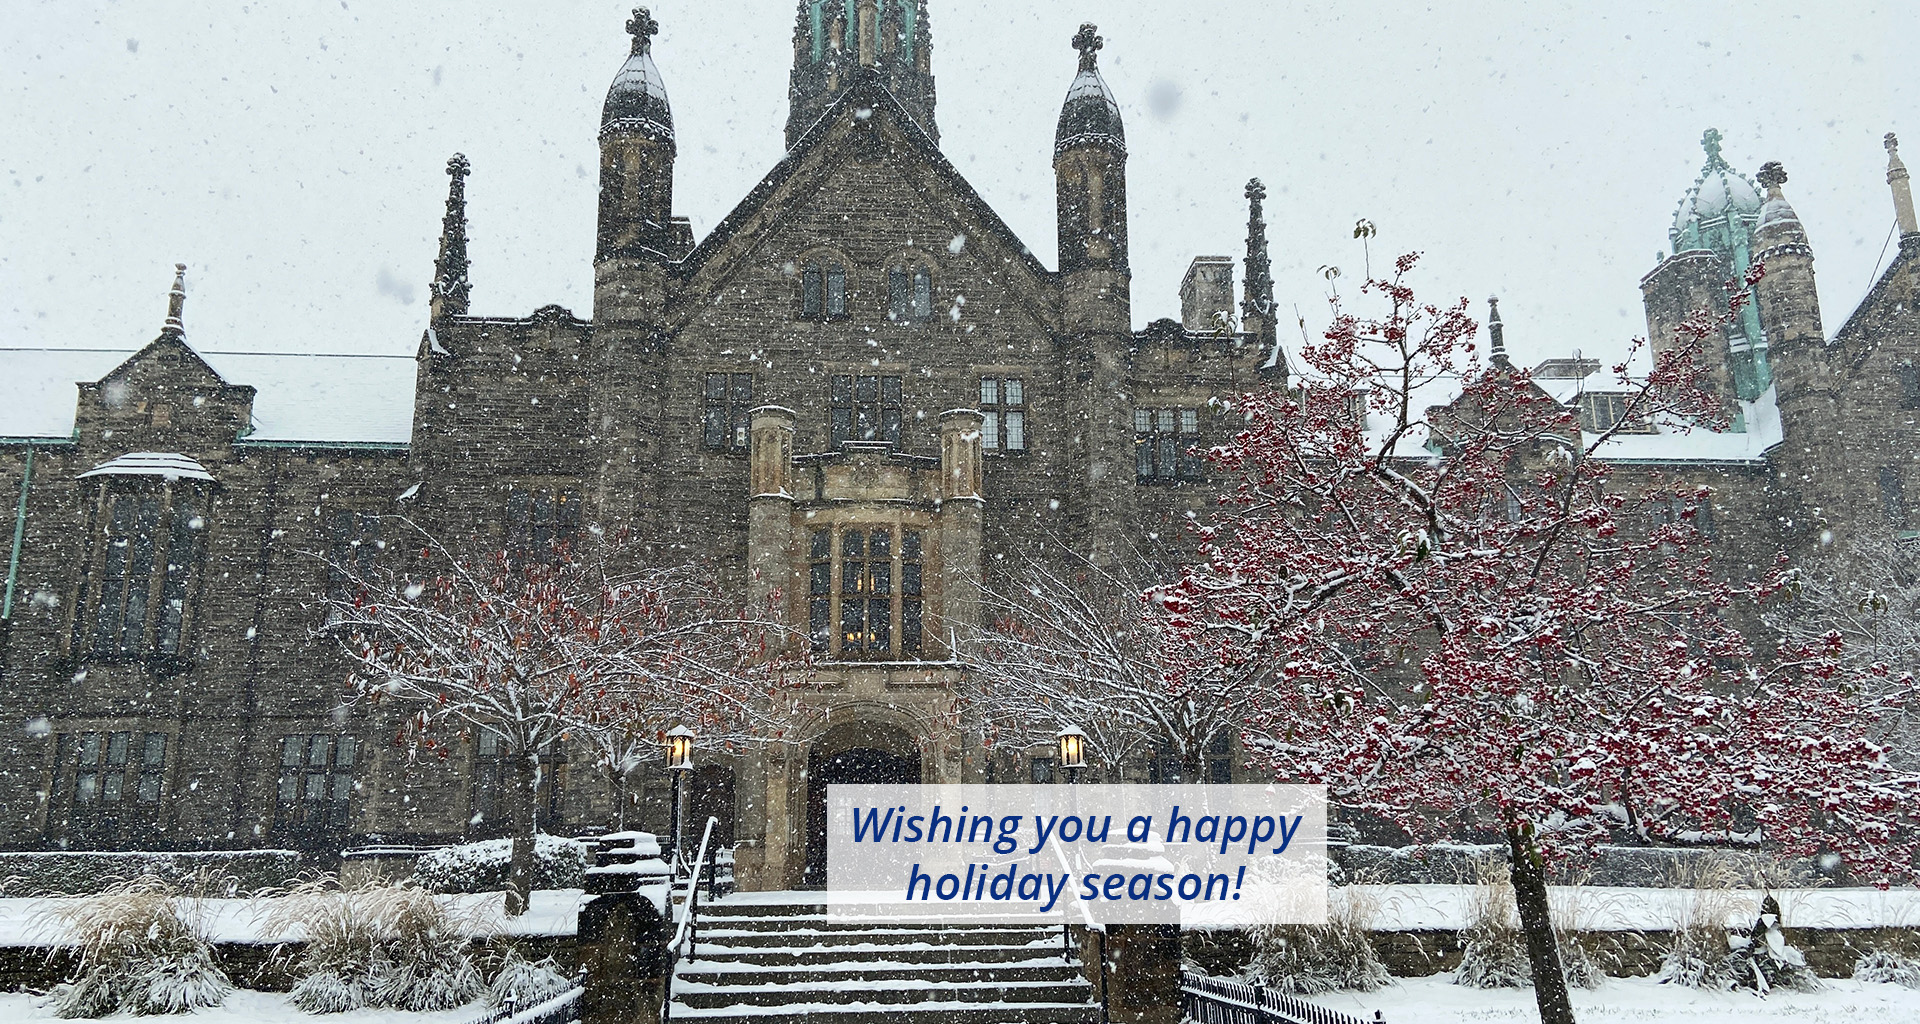 View of Trinity College during a winter snow storm with text: Wishing you a happy holiday season!